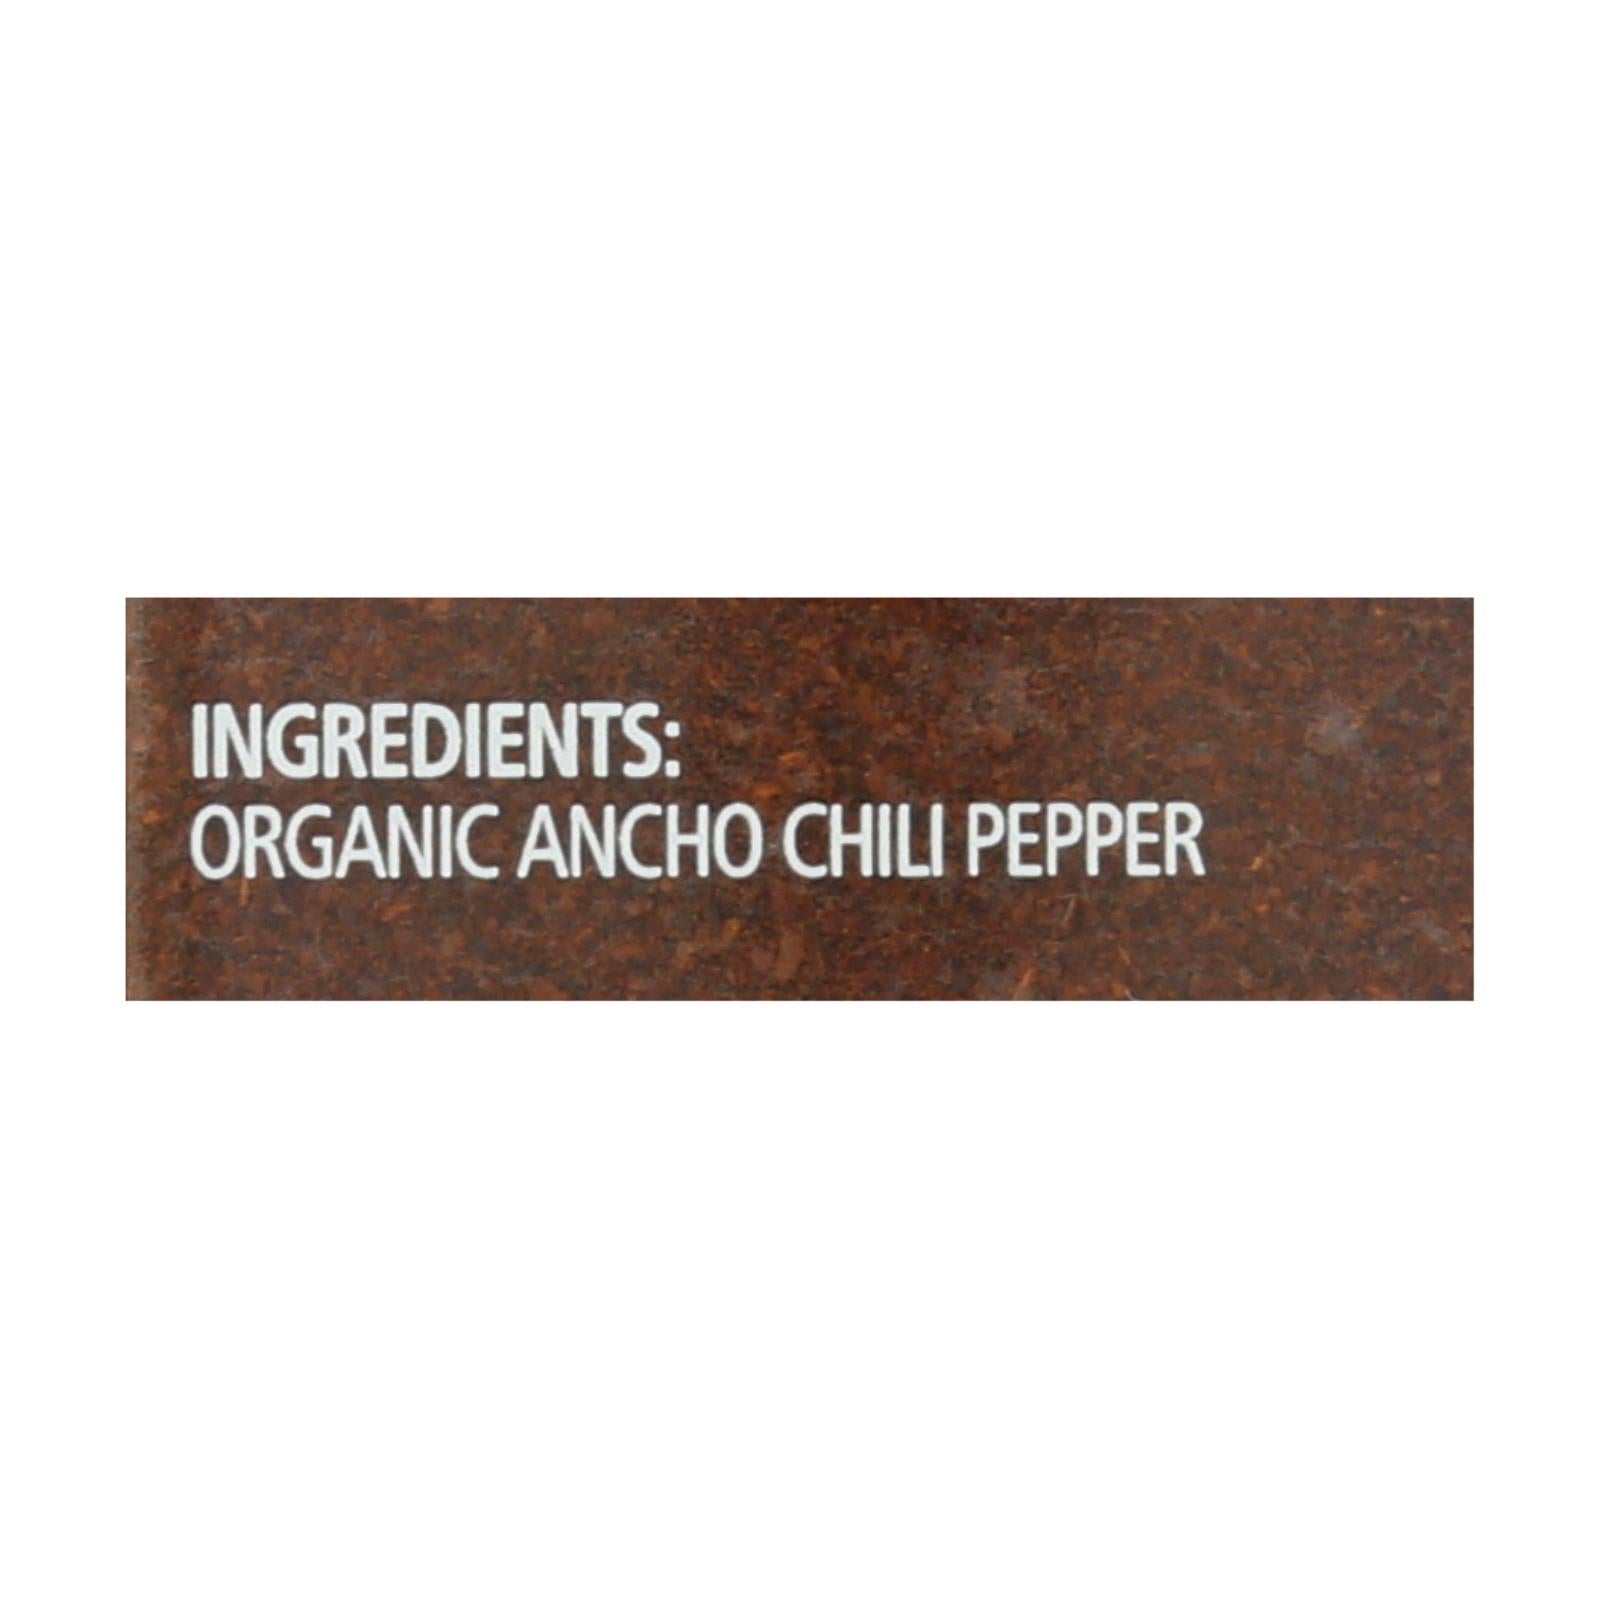 Organic Ancho Chili Powder From Simply Organic  - Case of 6 - 2.85 OZ